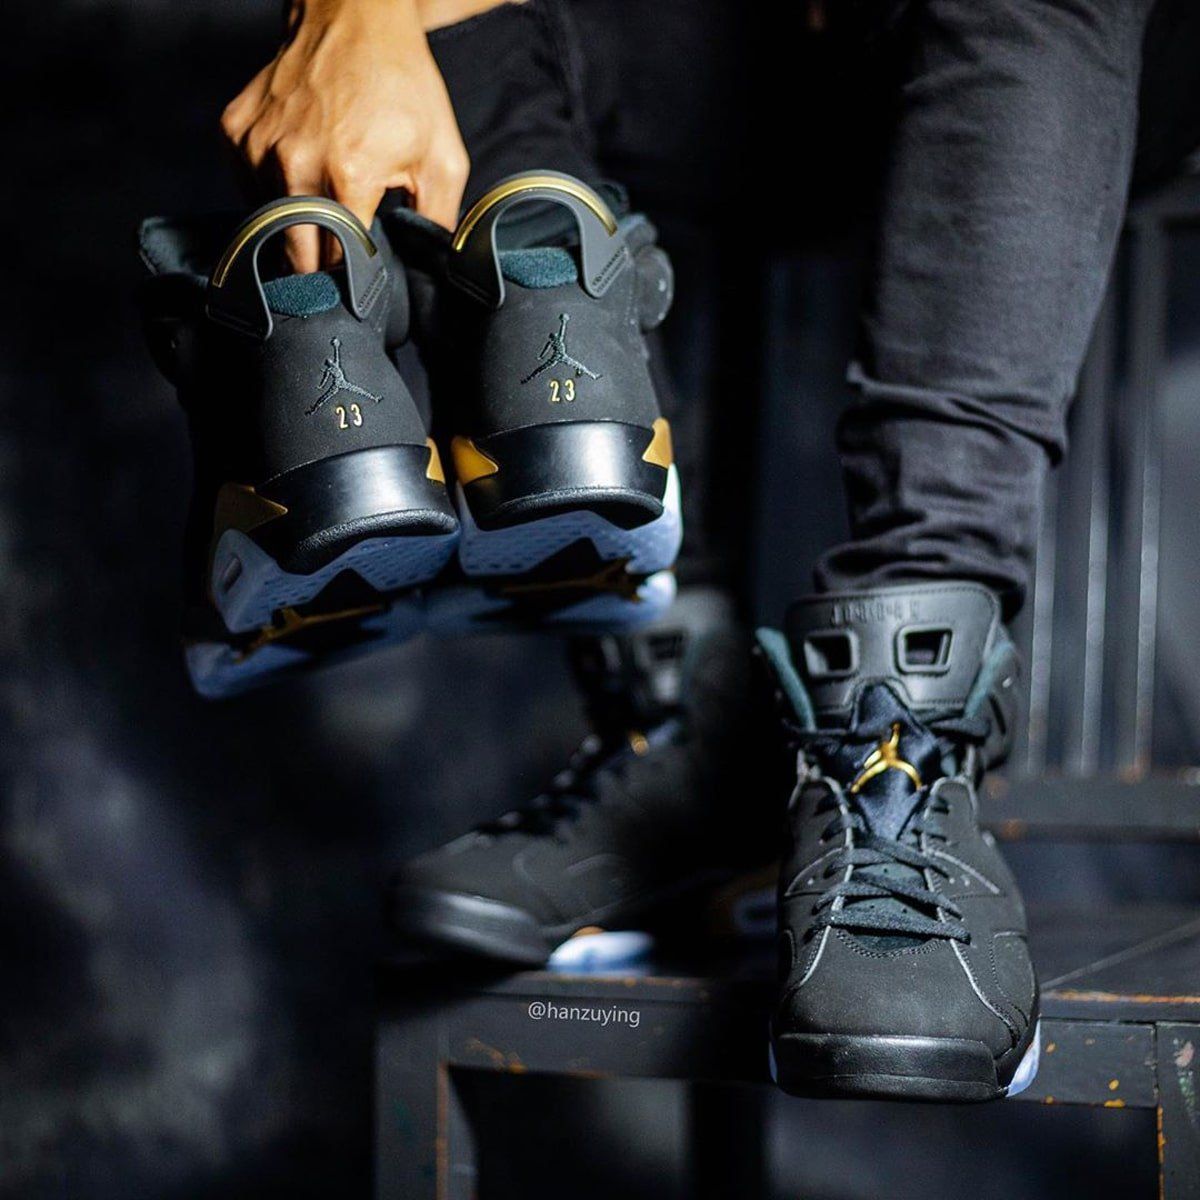 Where To Buy The Air Jordan 6 Dmp Defining Moments House Of Heat